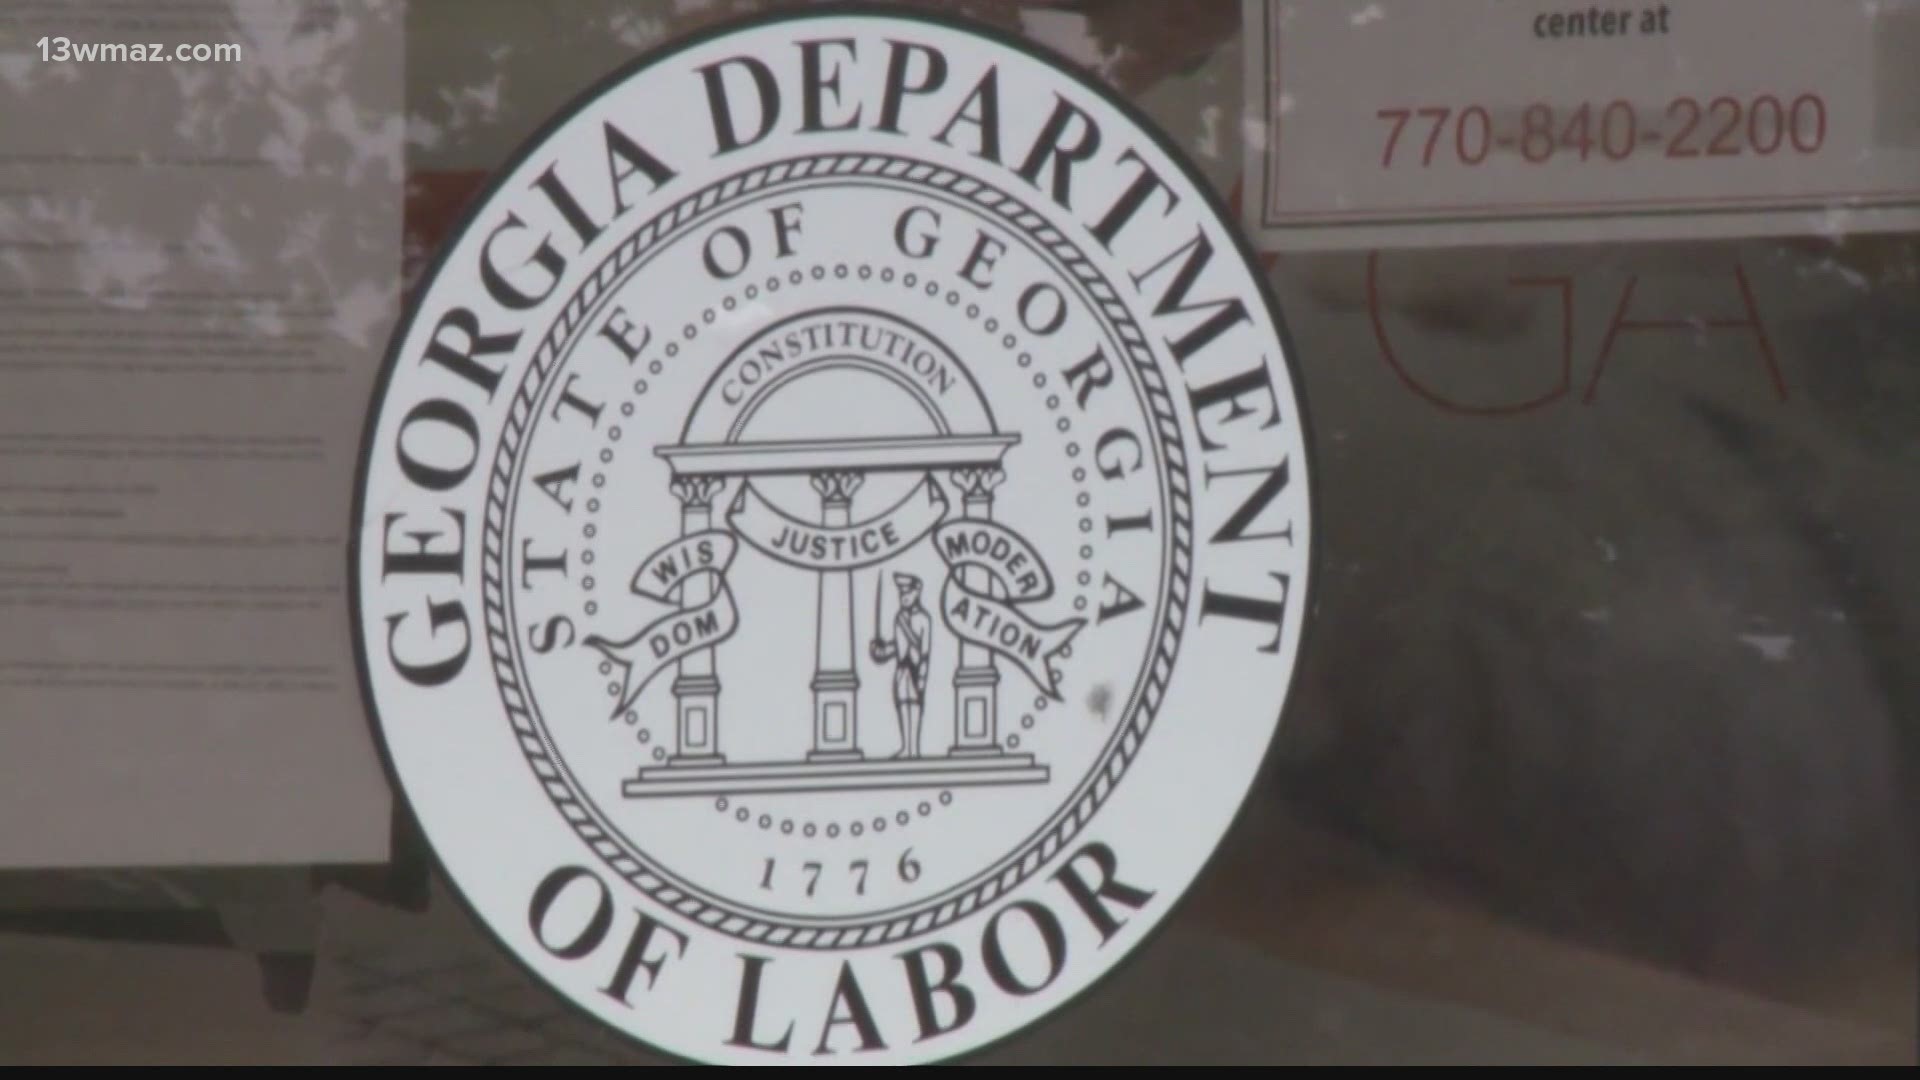 State Department of Labor says they'll start checking work records for unemployment again soon.